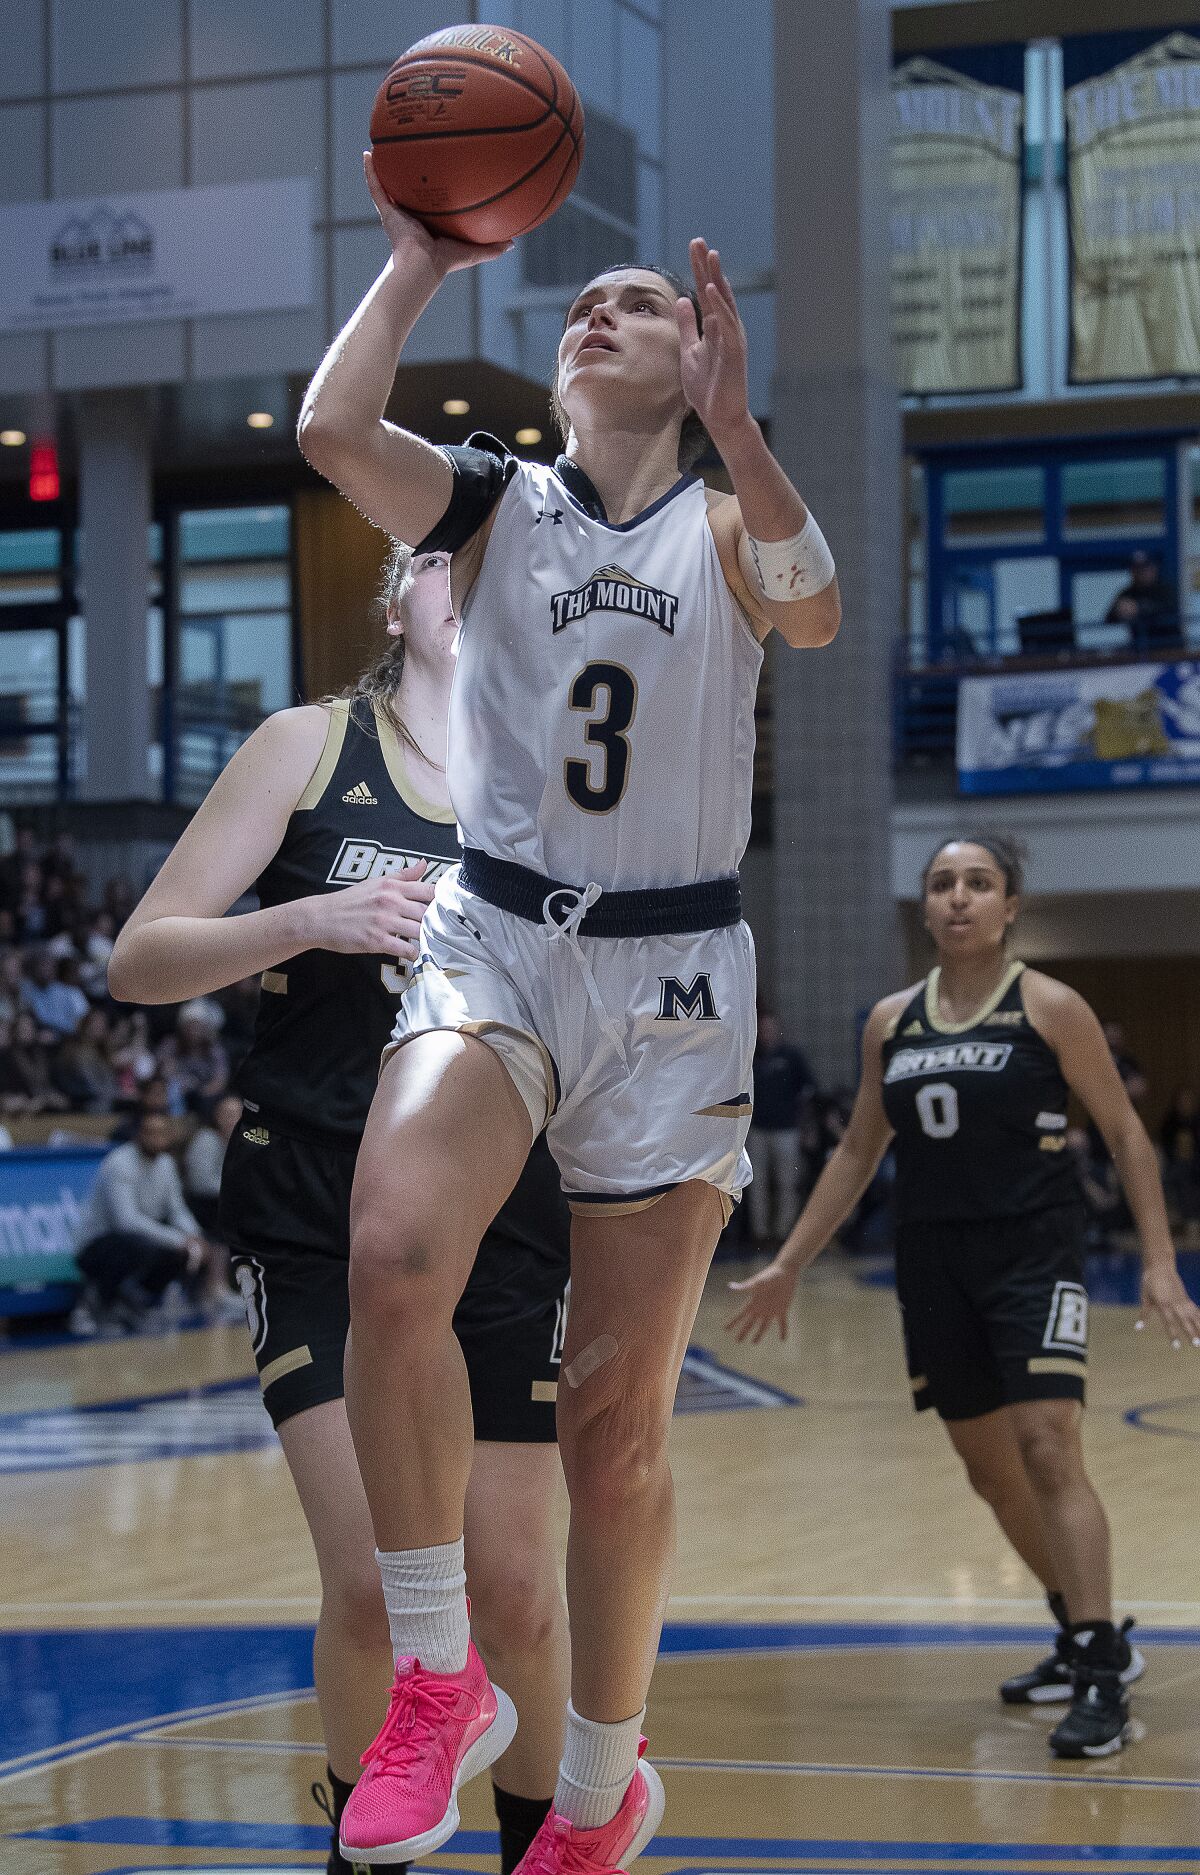 Mount St. Marys' Kendall Bresee (3) gets off a shot past Bryants' defenders in the first half of an NCAA college basketball game for the championship of the Northeast Conference women's tournament, Sunday, March 13, 2021, in Emmitsburg, Md. (Bill Green/The Frederick News-Post via AP)